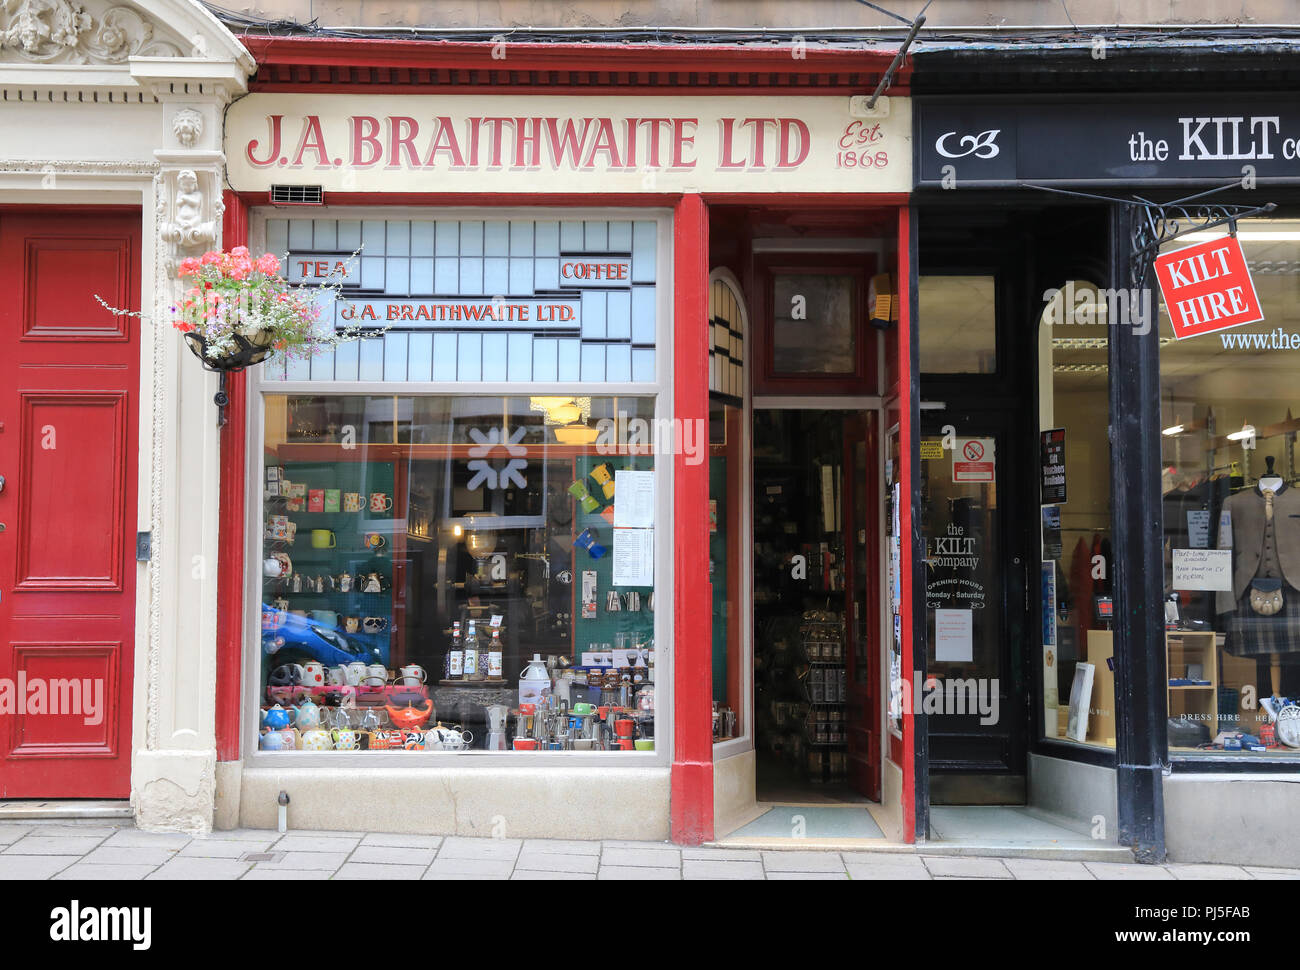 J.A.Braithwaite. the oldest shop in Dundee, and a merchant of fine teas and  coffees, on Castle Street, in Scotland, UK Stock Photo - Alamy